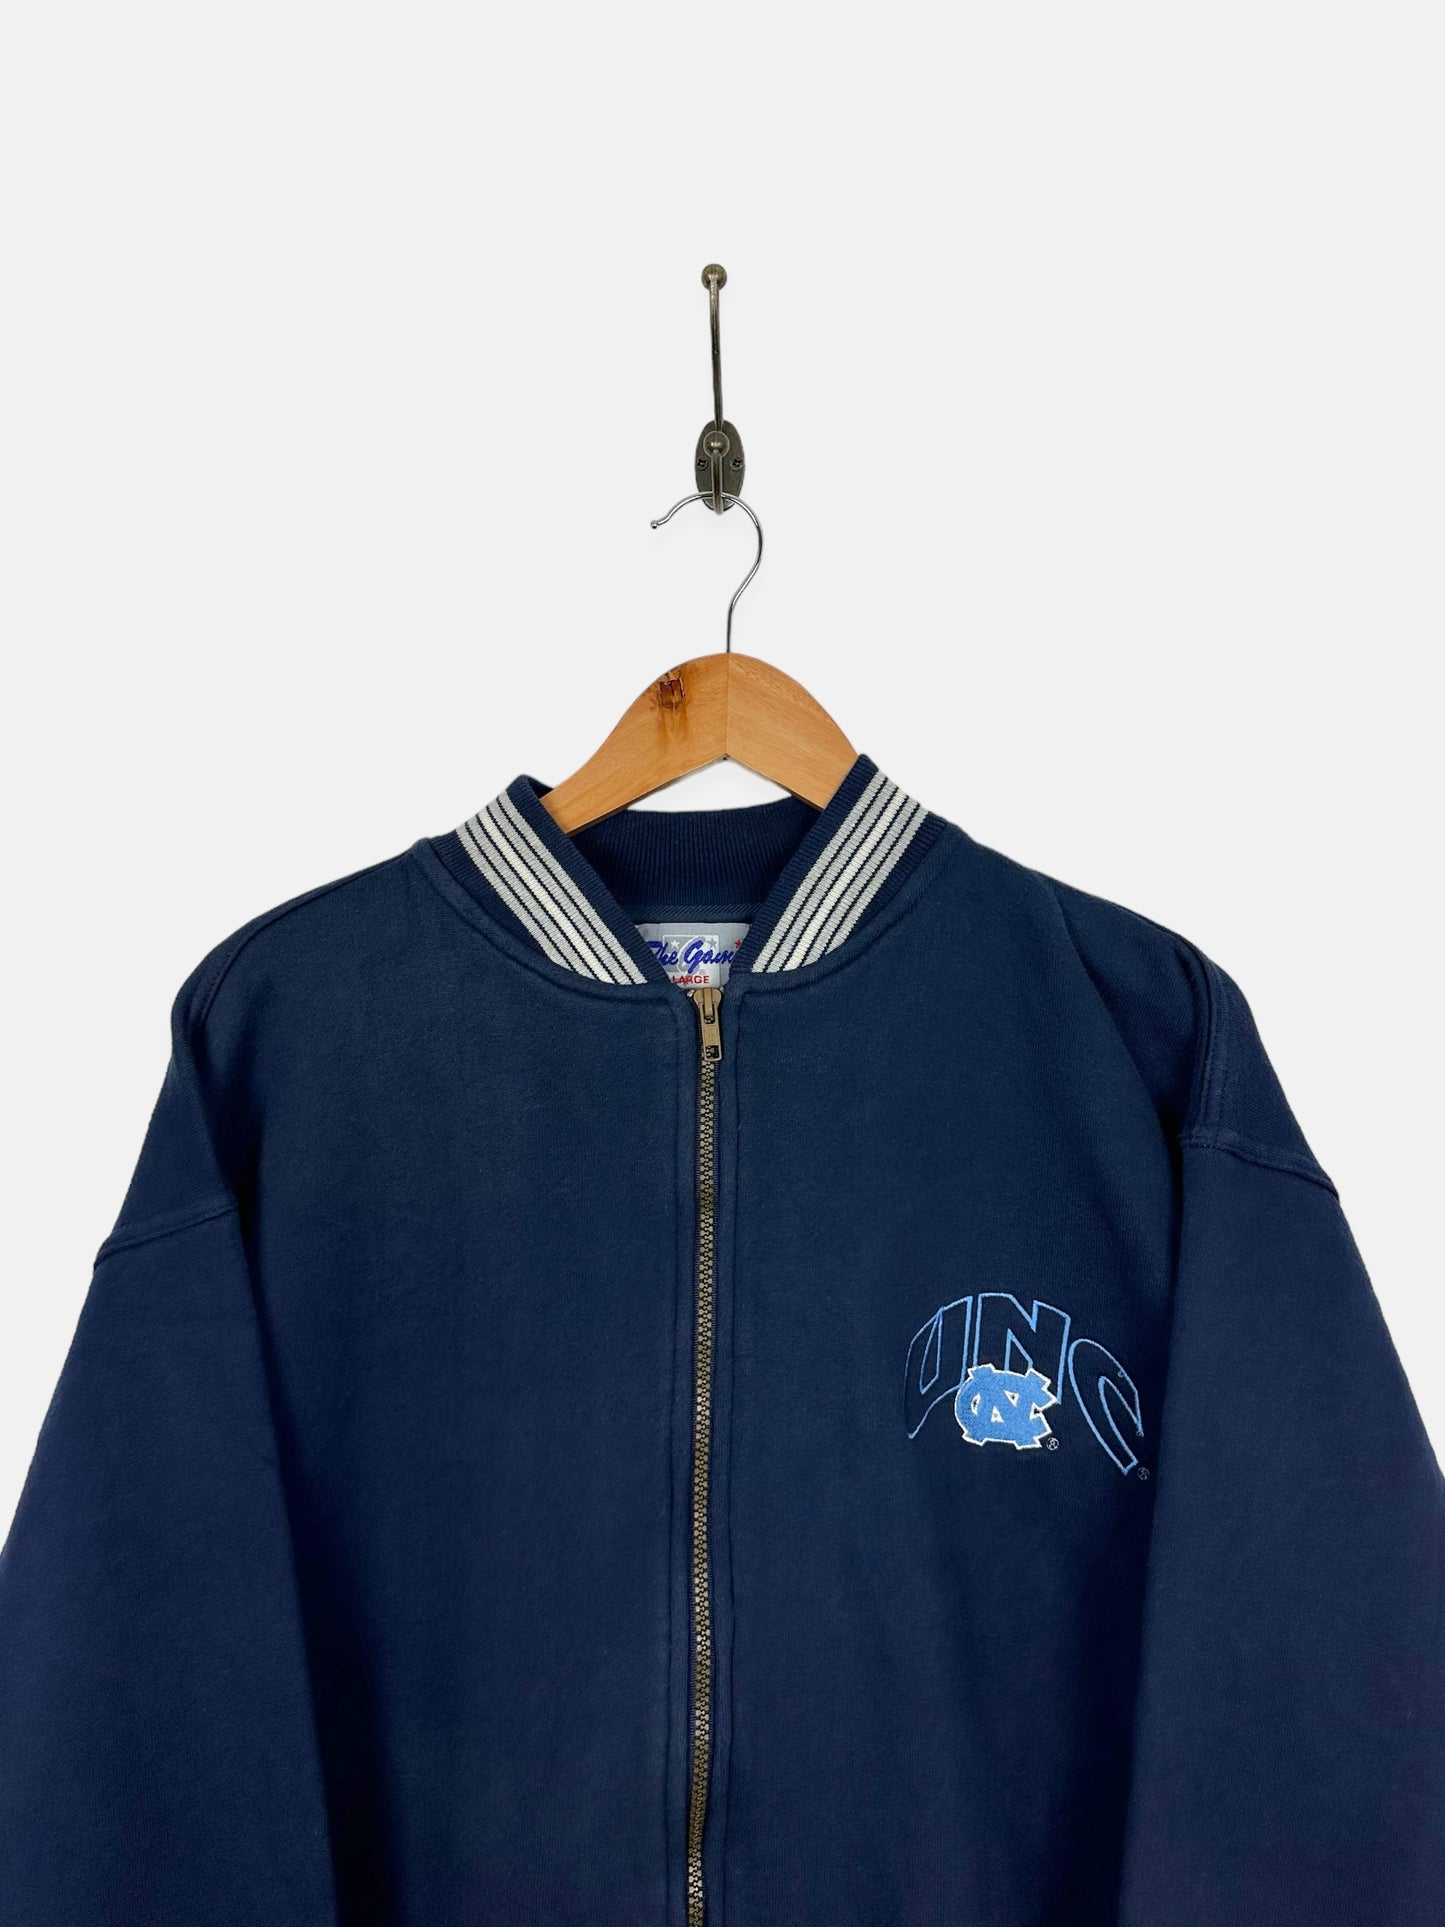 90's UNC Embroidered Vintage Zip-Up Jersey/Jacket Size M-L